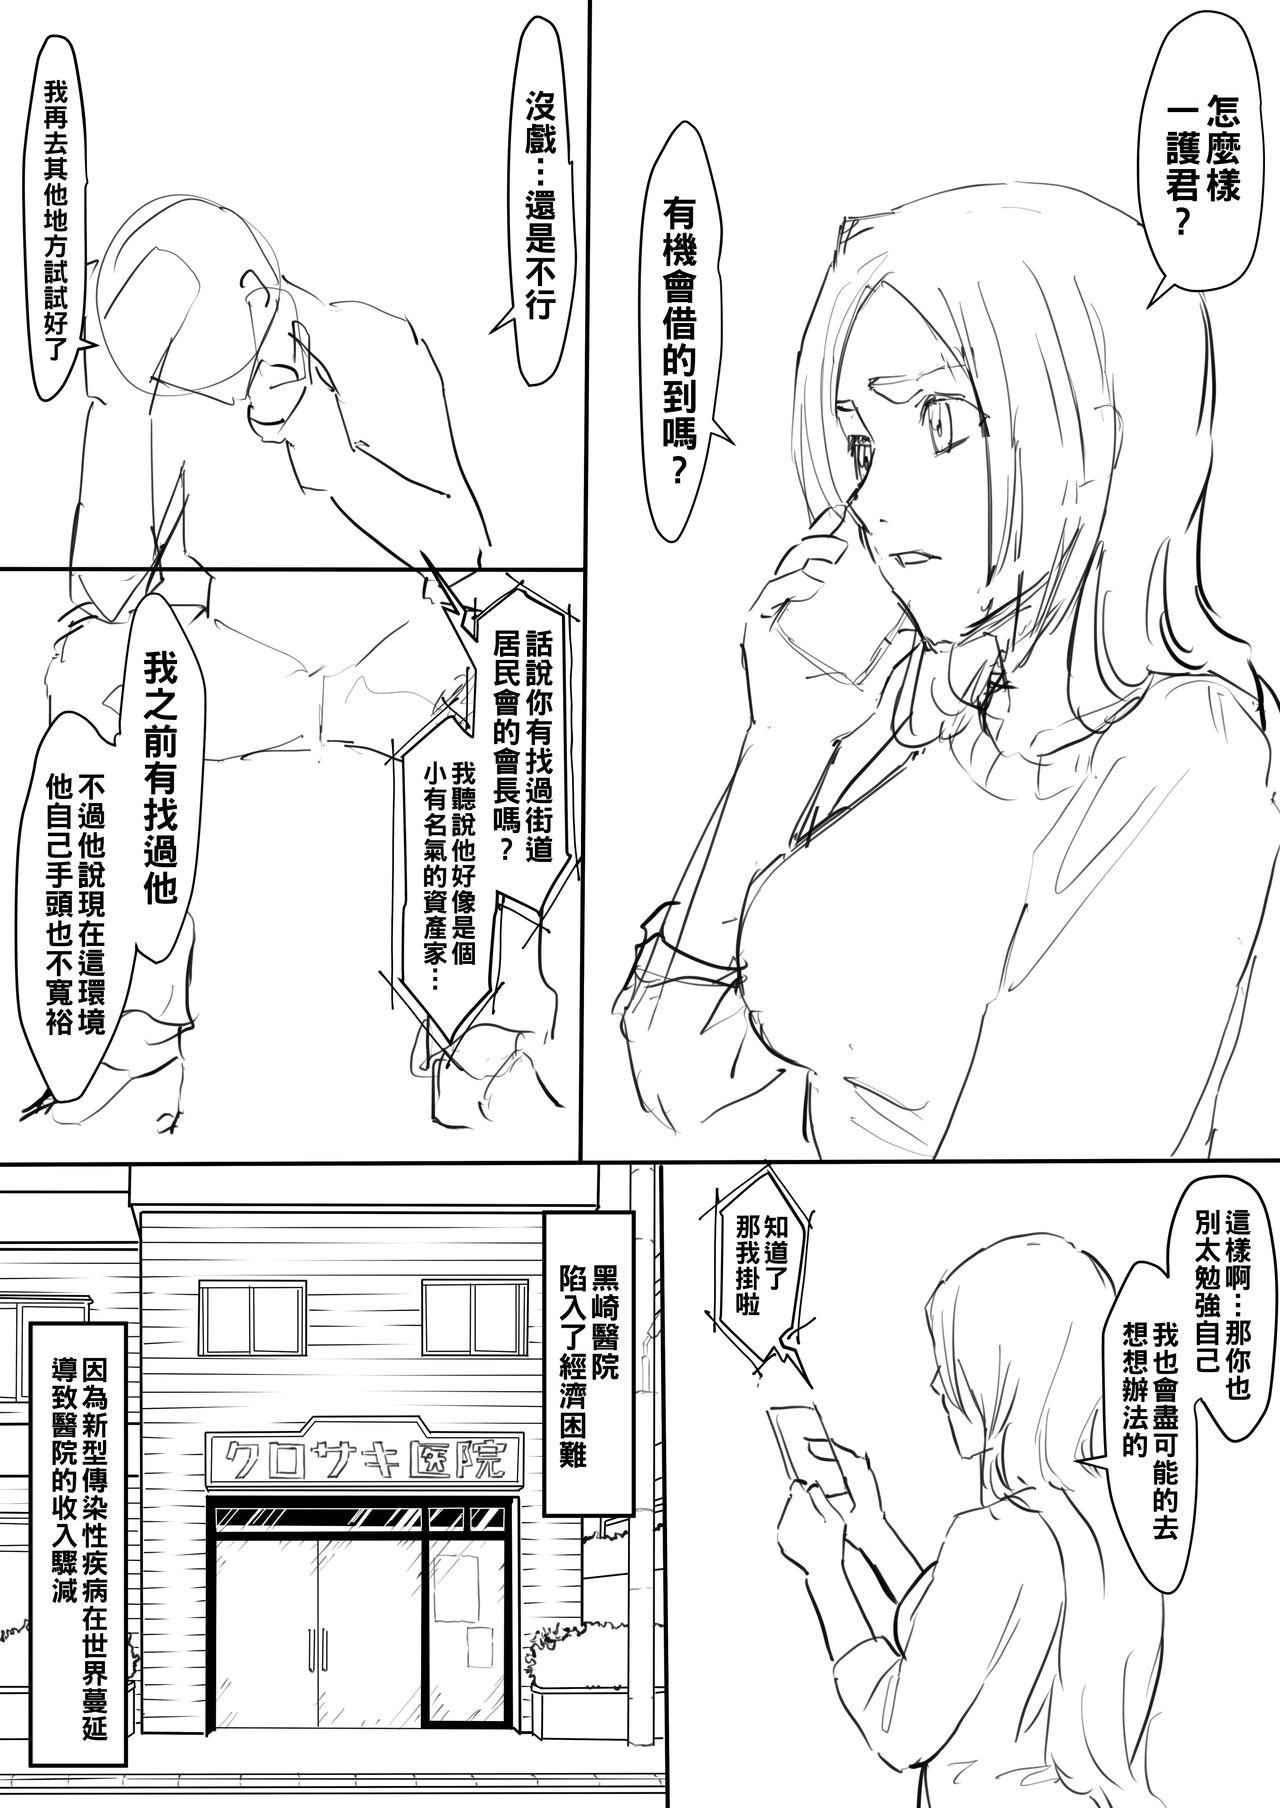 18 Year Old Orihime Manga - Bleach Tats - Picture 1